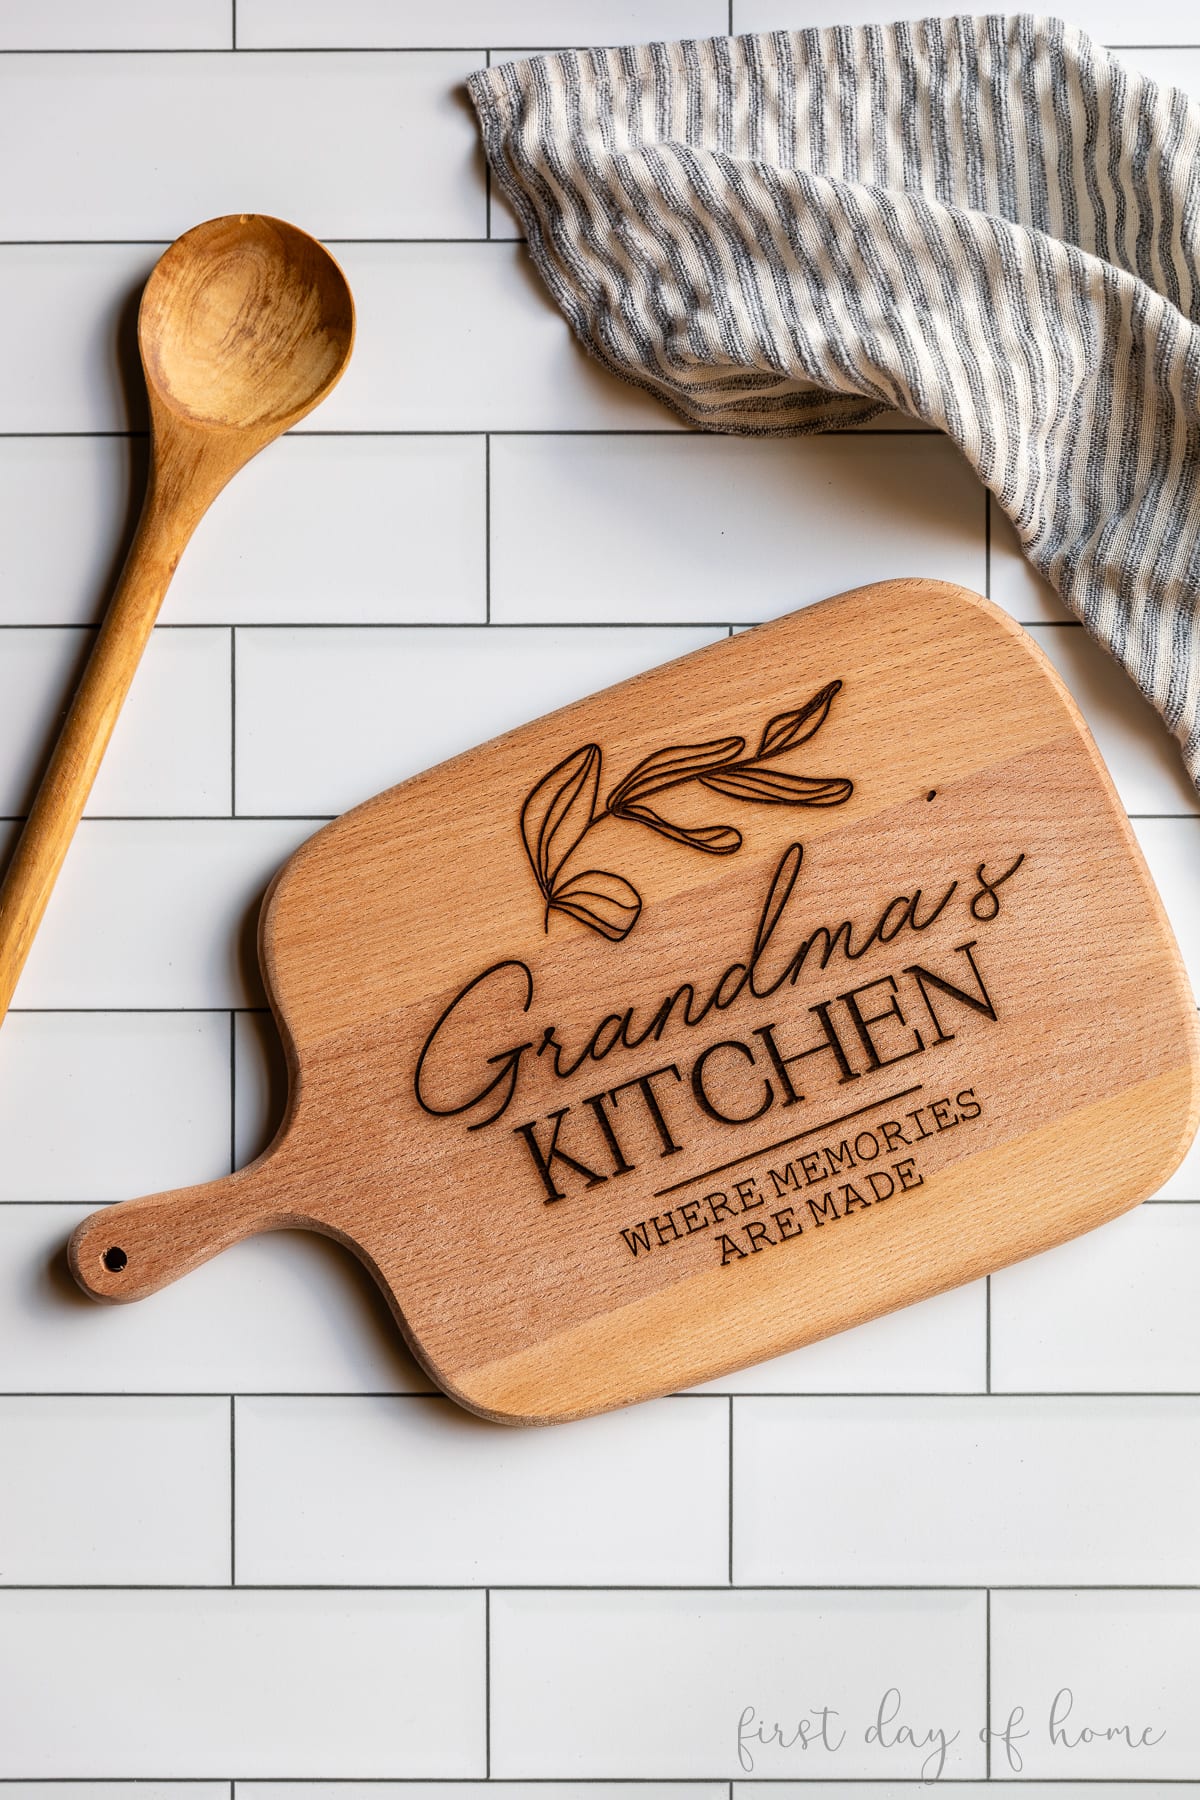 Personalized cutting board that reads "Grandma's Kitchen: Where Memories are Made".